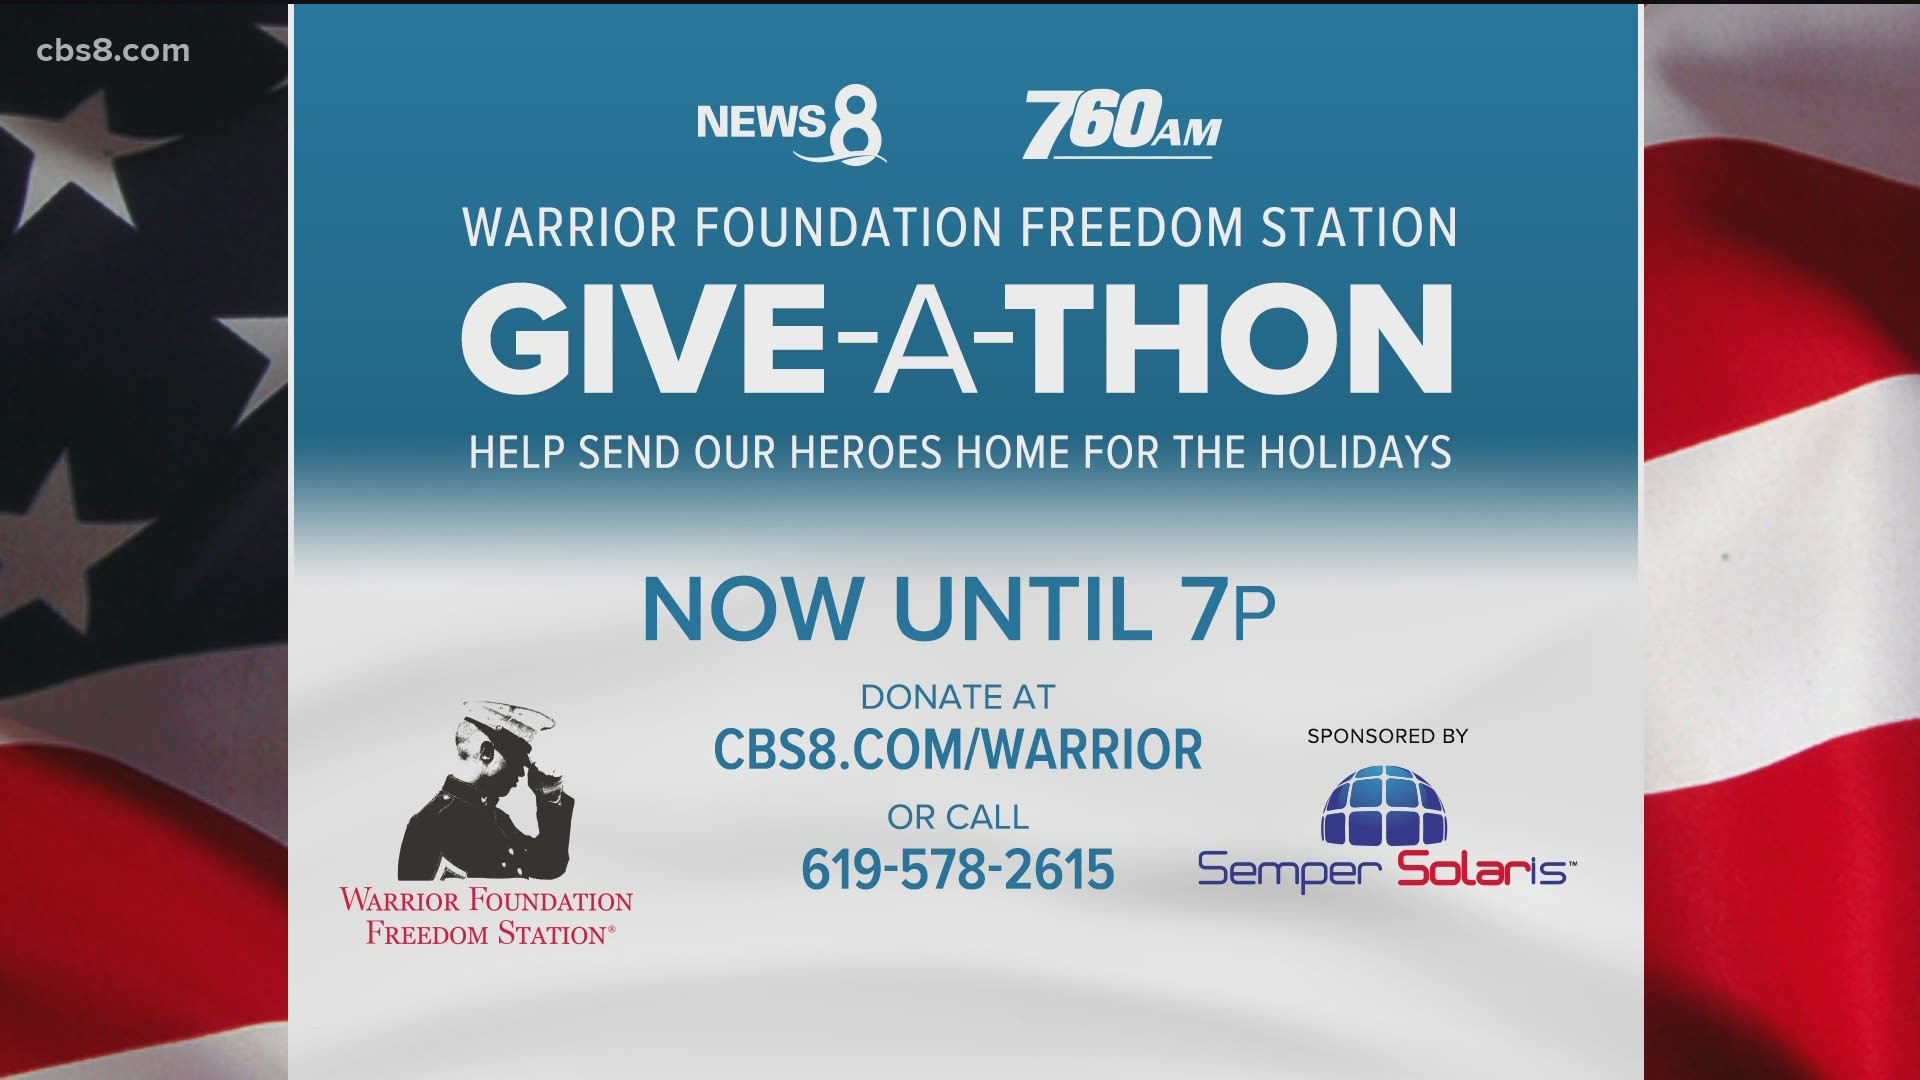 Join us Friday, Nov. 20, 2020, from 6 a.m. to 7 p.m. for special coverage of our injured warriors.